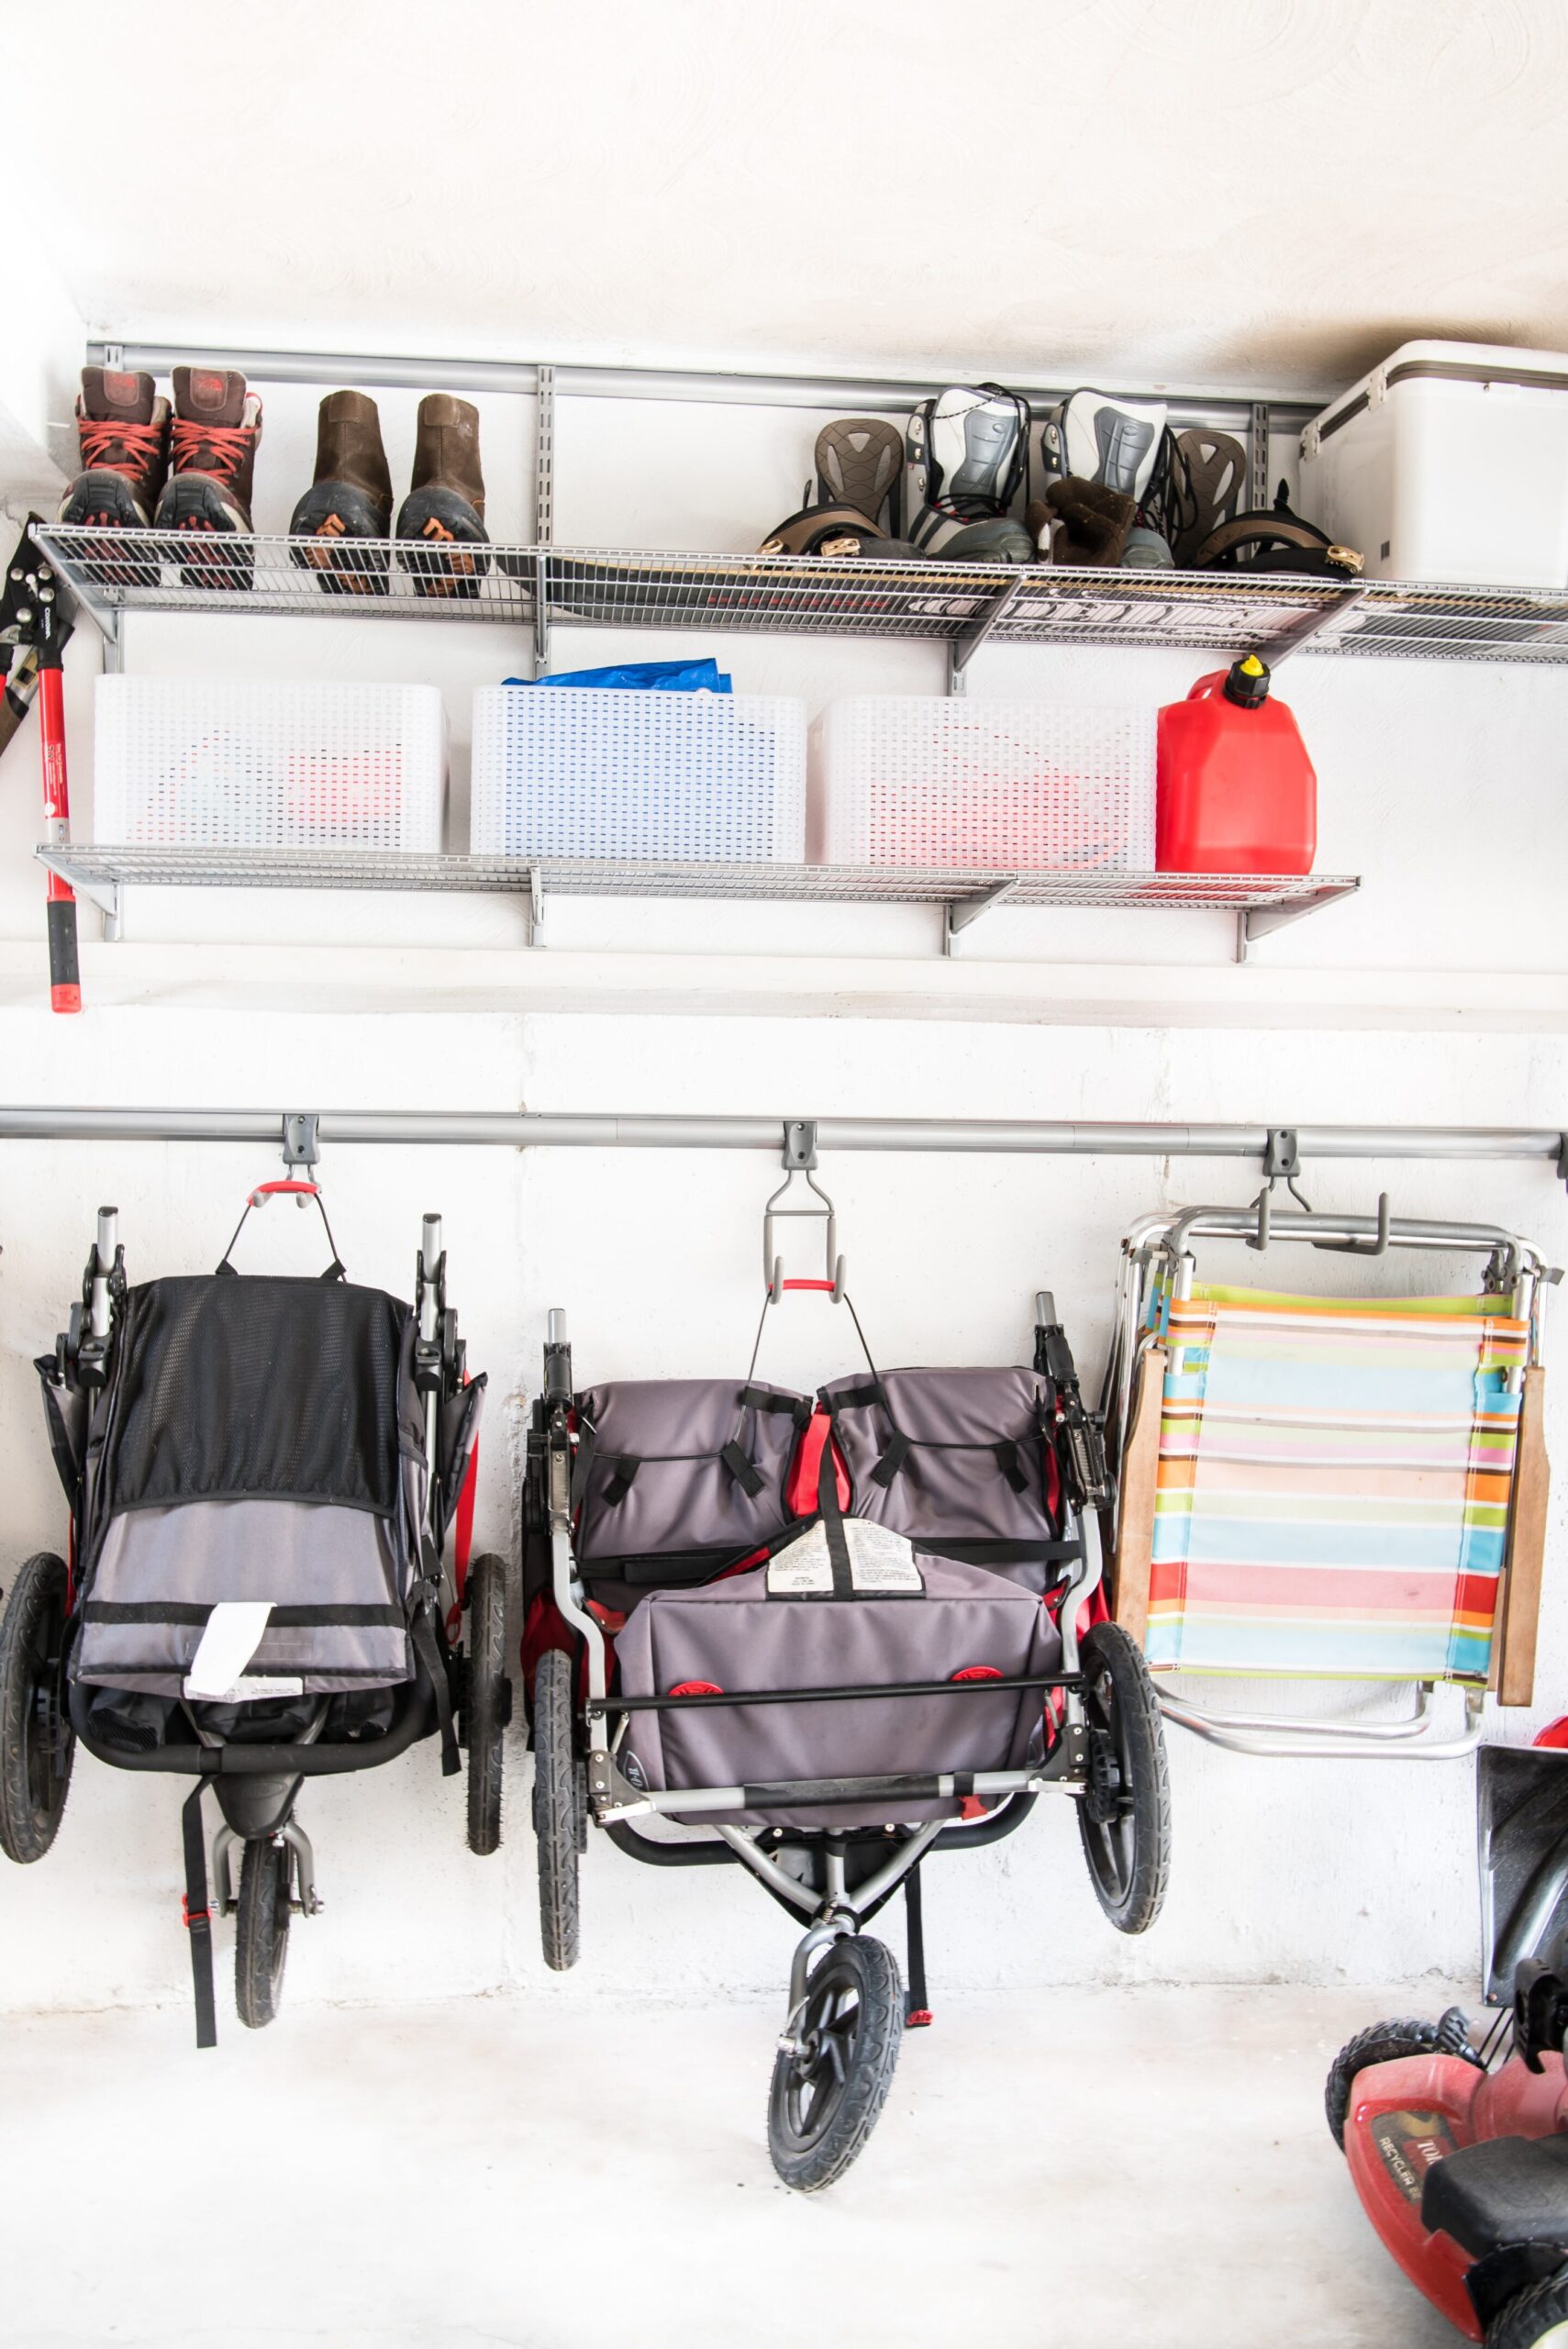 Strollers, Beach chairs, and other objects hanging from wall hooks on a garage wall.